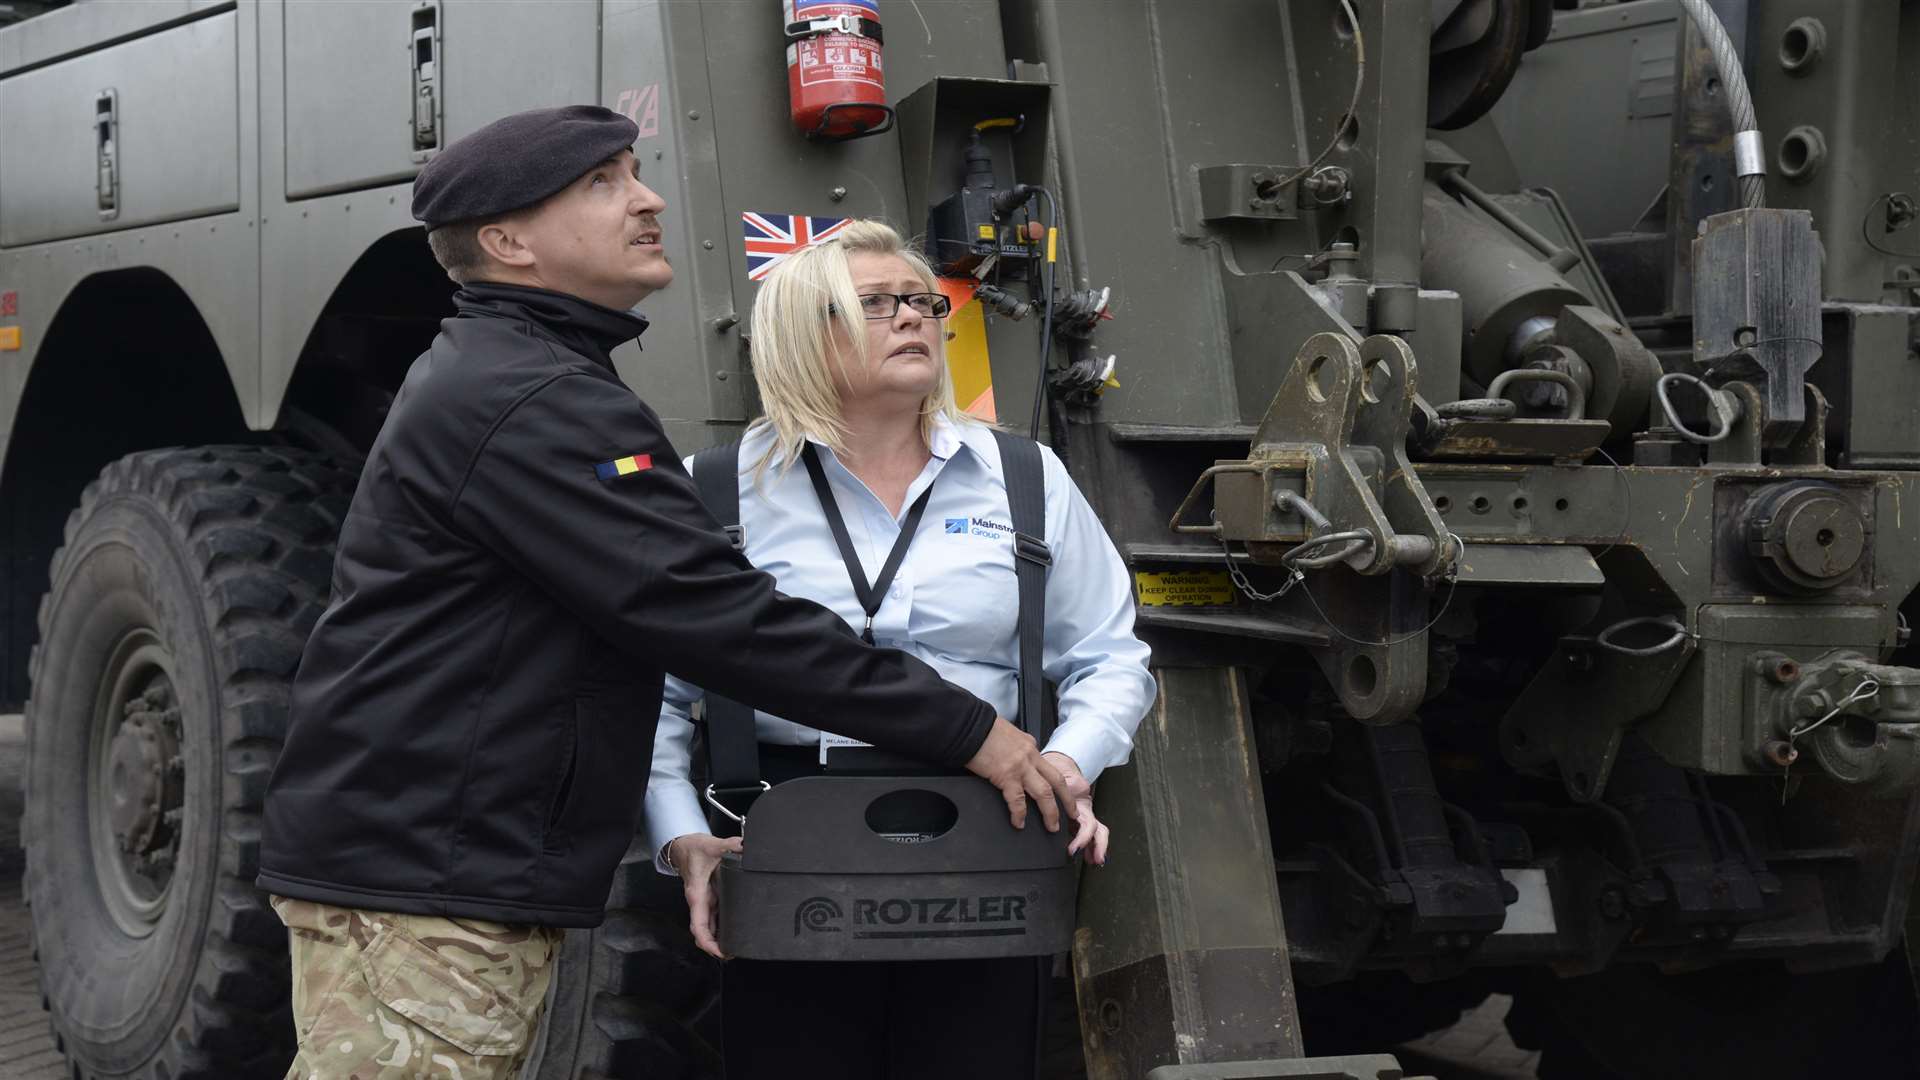 L Cpl James Hamilton of the Royal Electrical and Mechanical Engineers coaches Mainstream's Melanie Baker on the controls of an army recovery vehicle during the open day